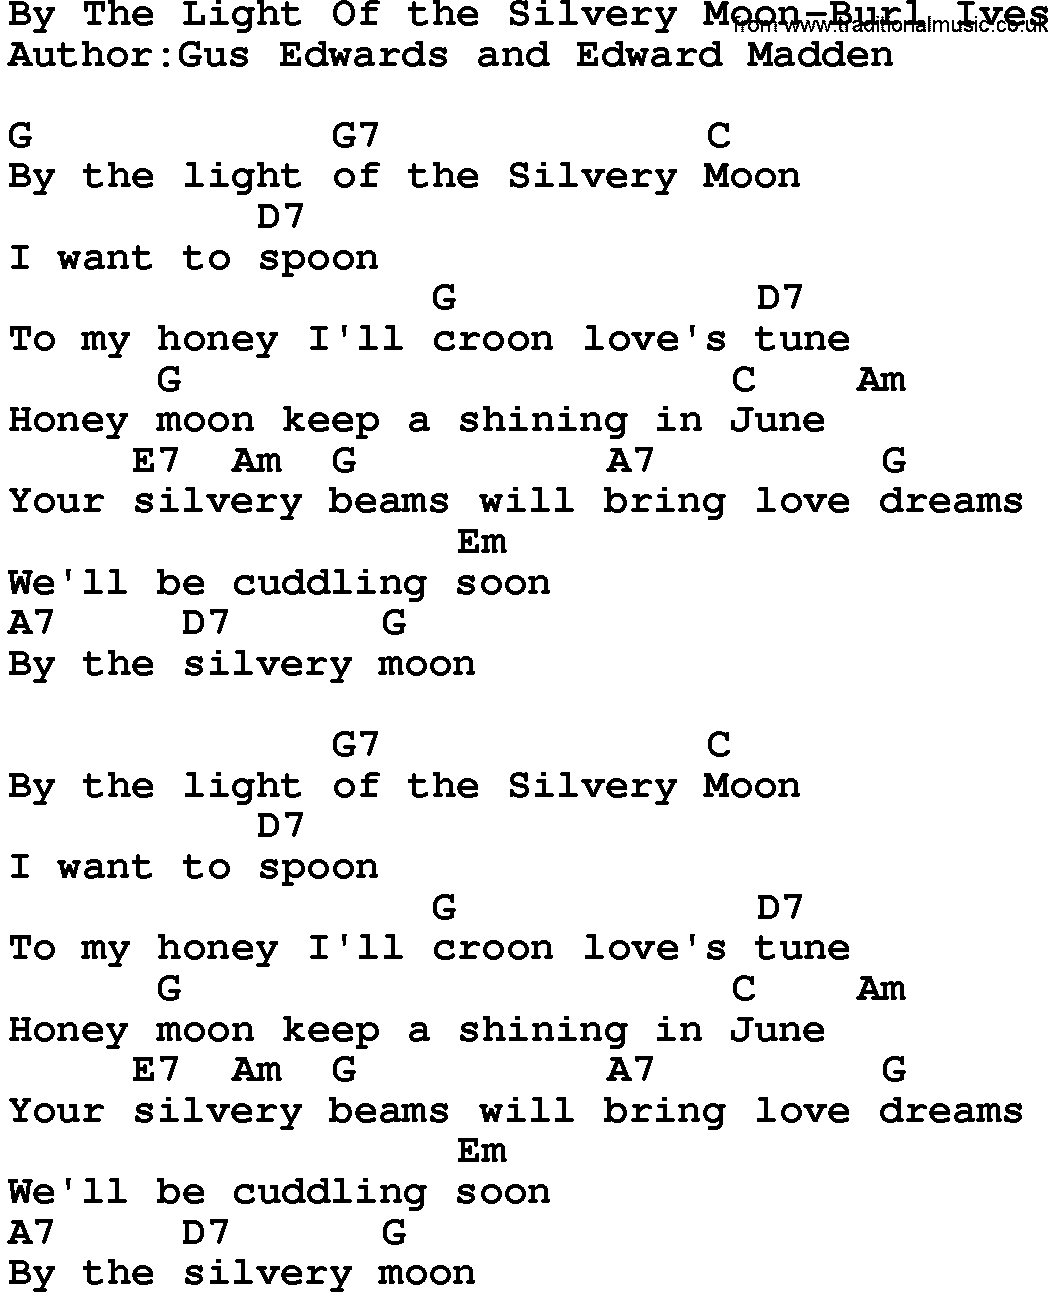 Country music song: By The Light Of The Silvery Moon-Burl Ives lyrics and chords